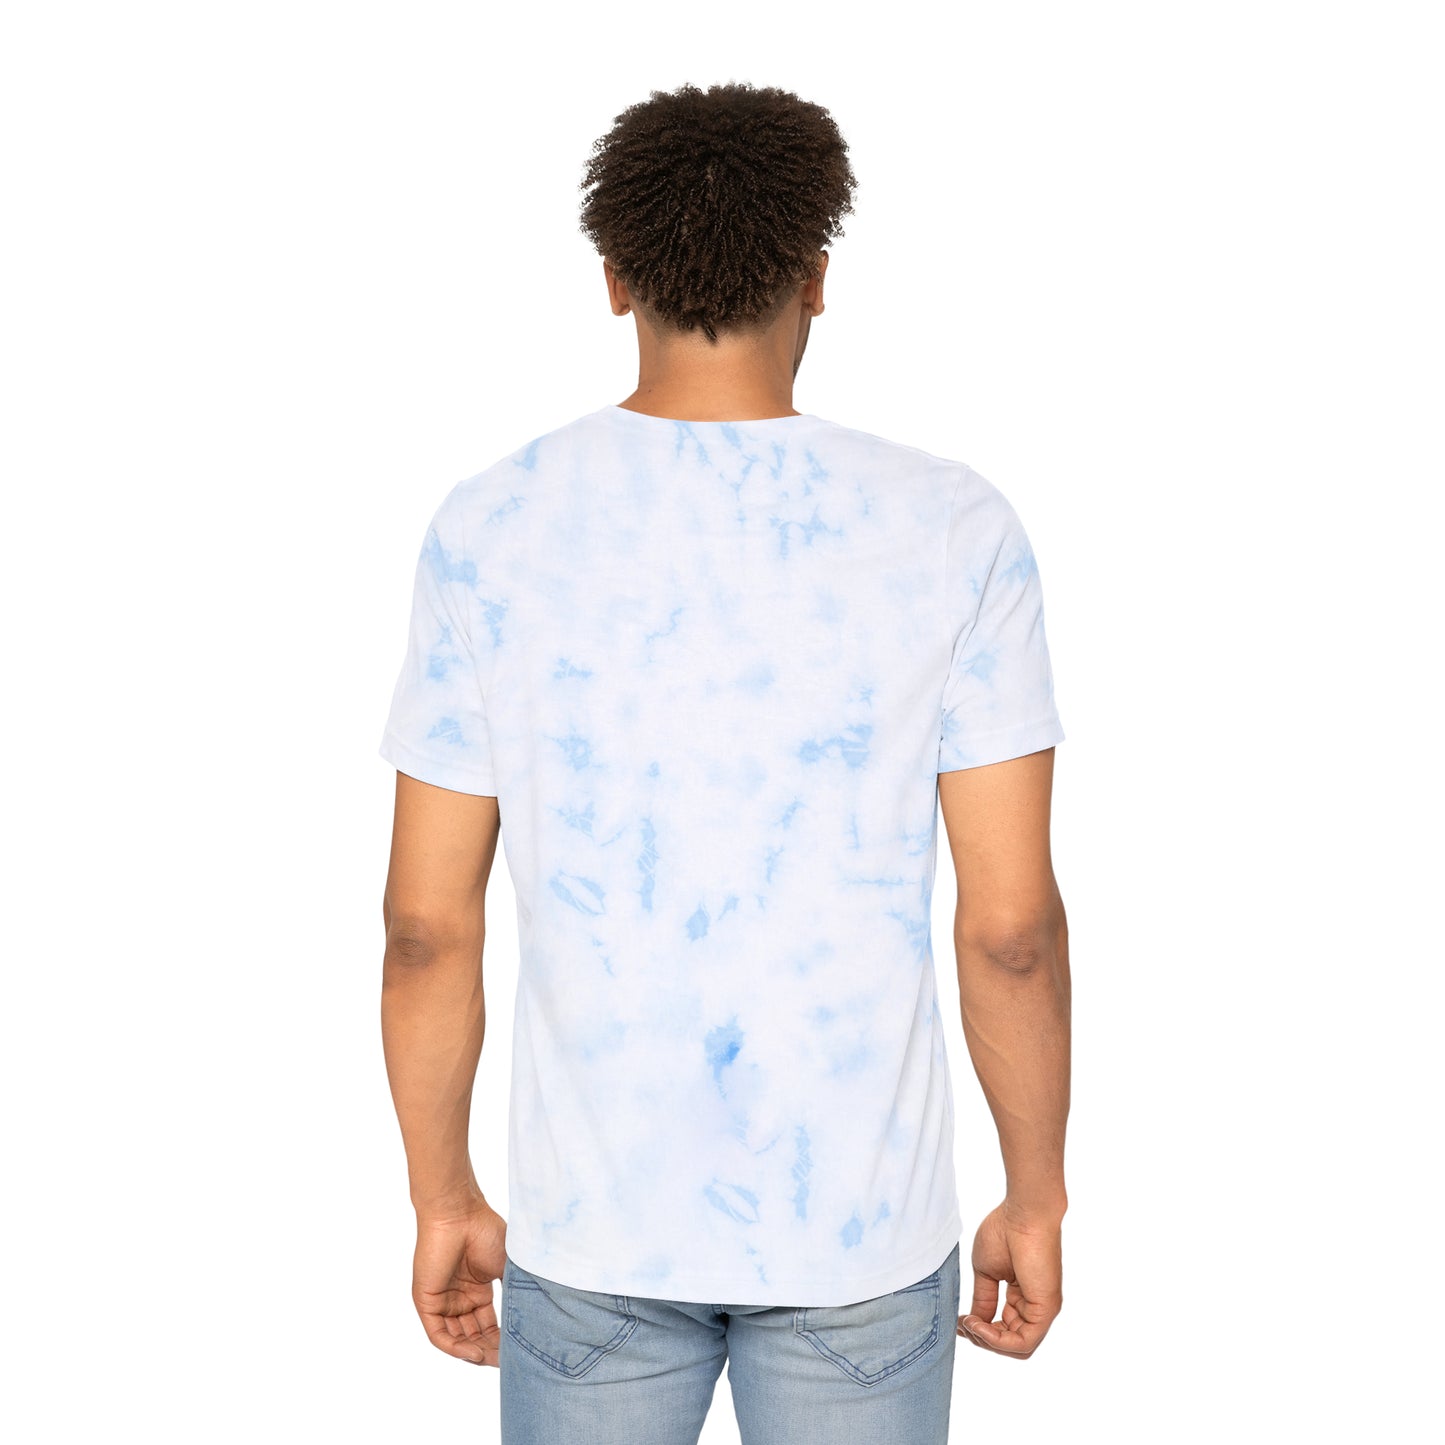 Be Part of the Story Unisex Fashion Tie-Dyed T-Shirt